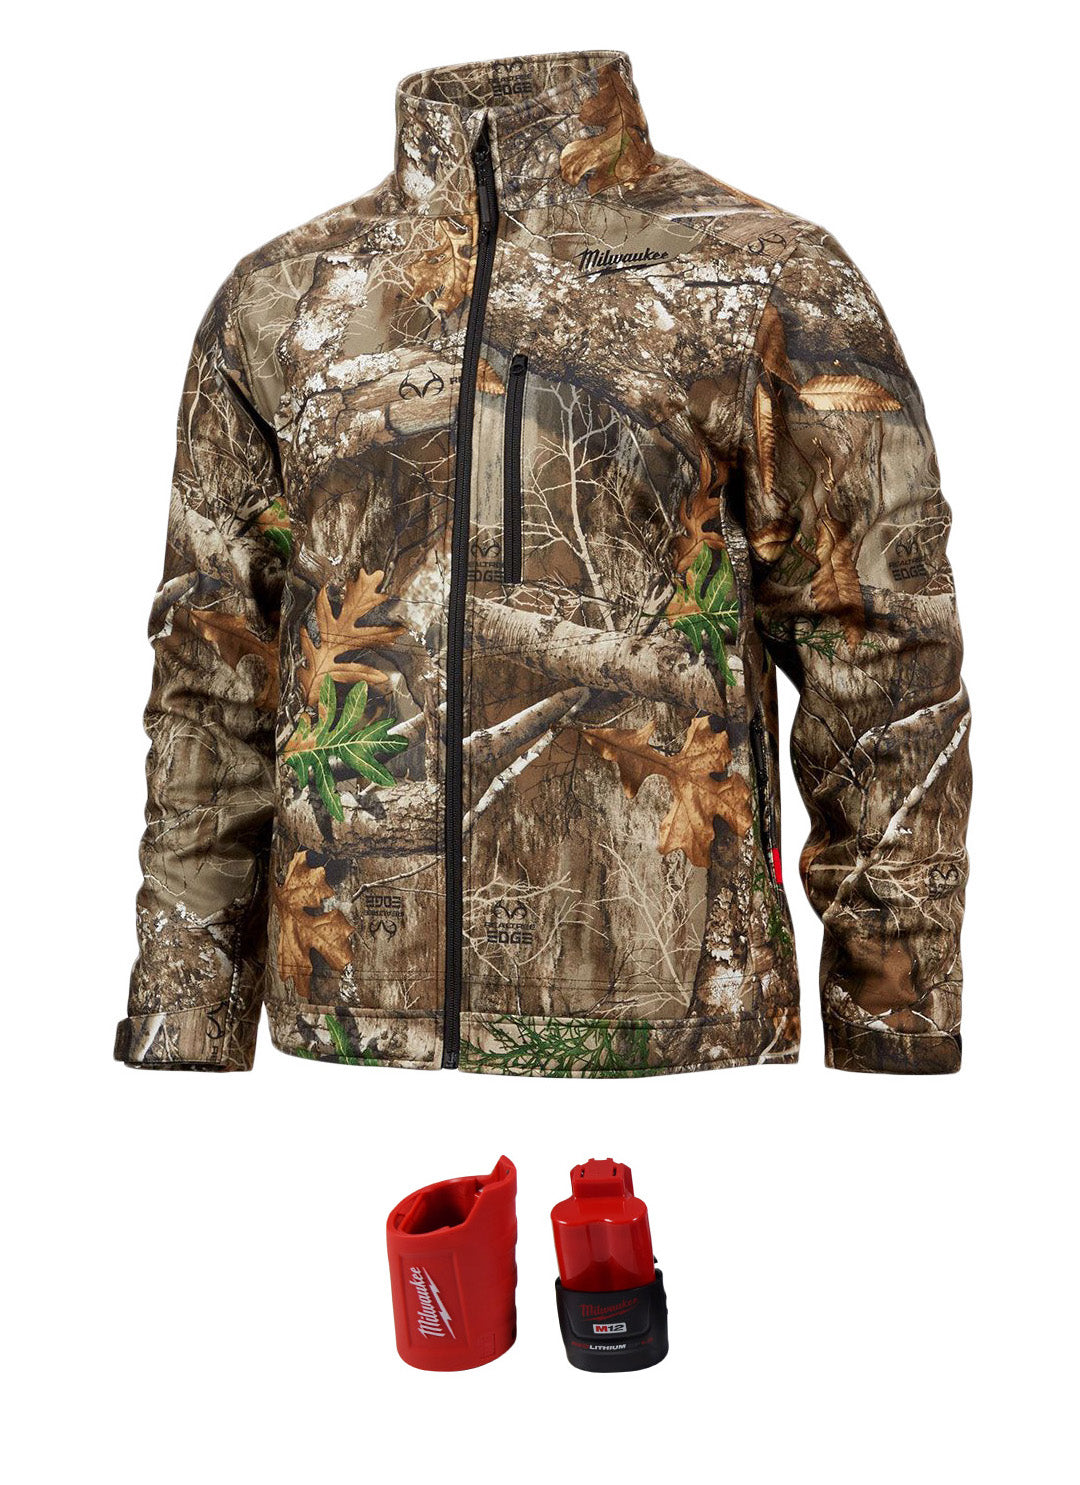 Milwaukee 224C-21L M12 Lithium-Ion QUIETSHELL Camo Heated Jacket Kit with Battery (Large)